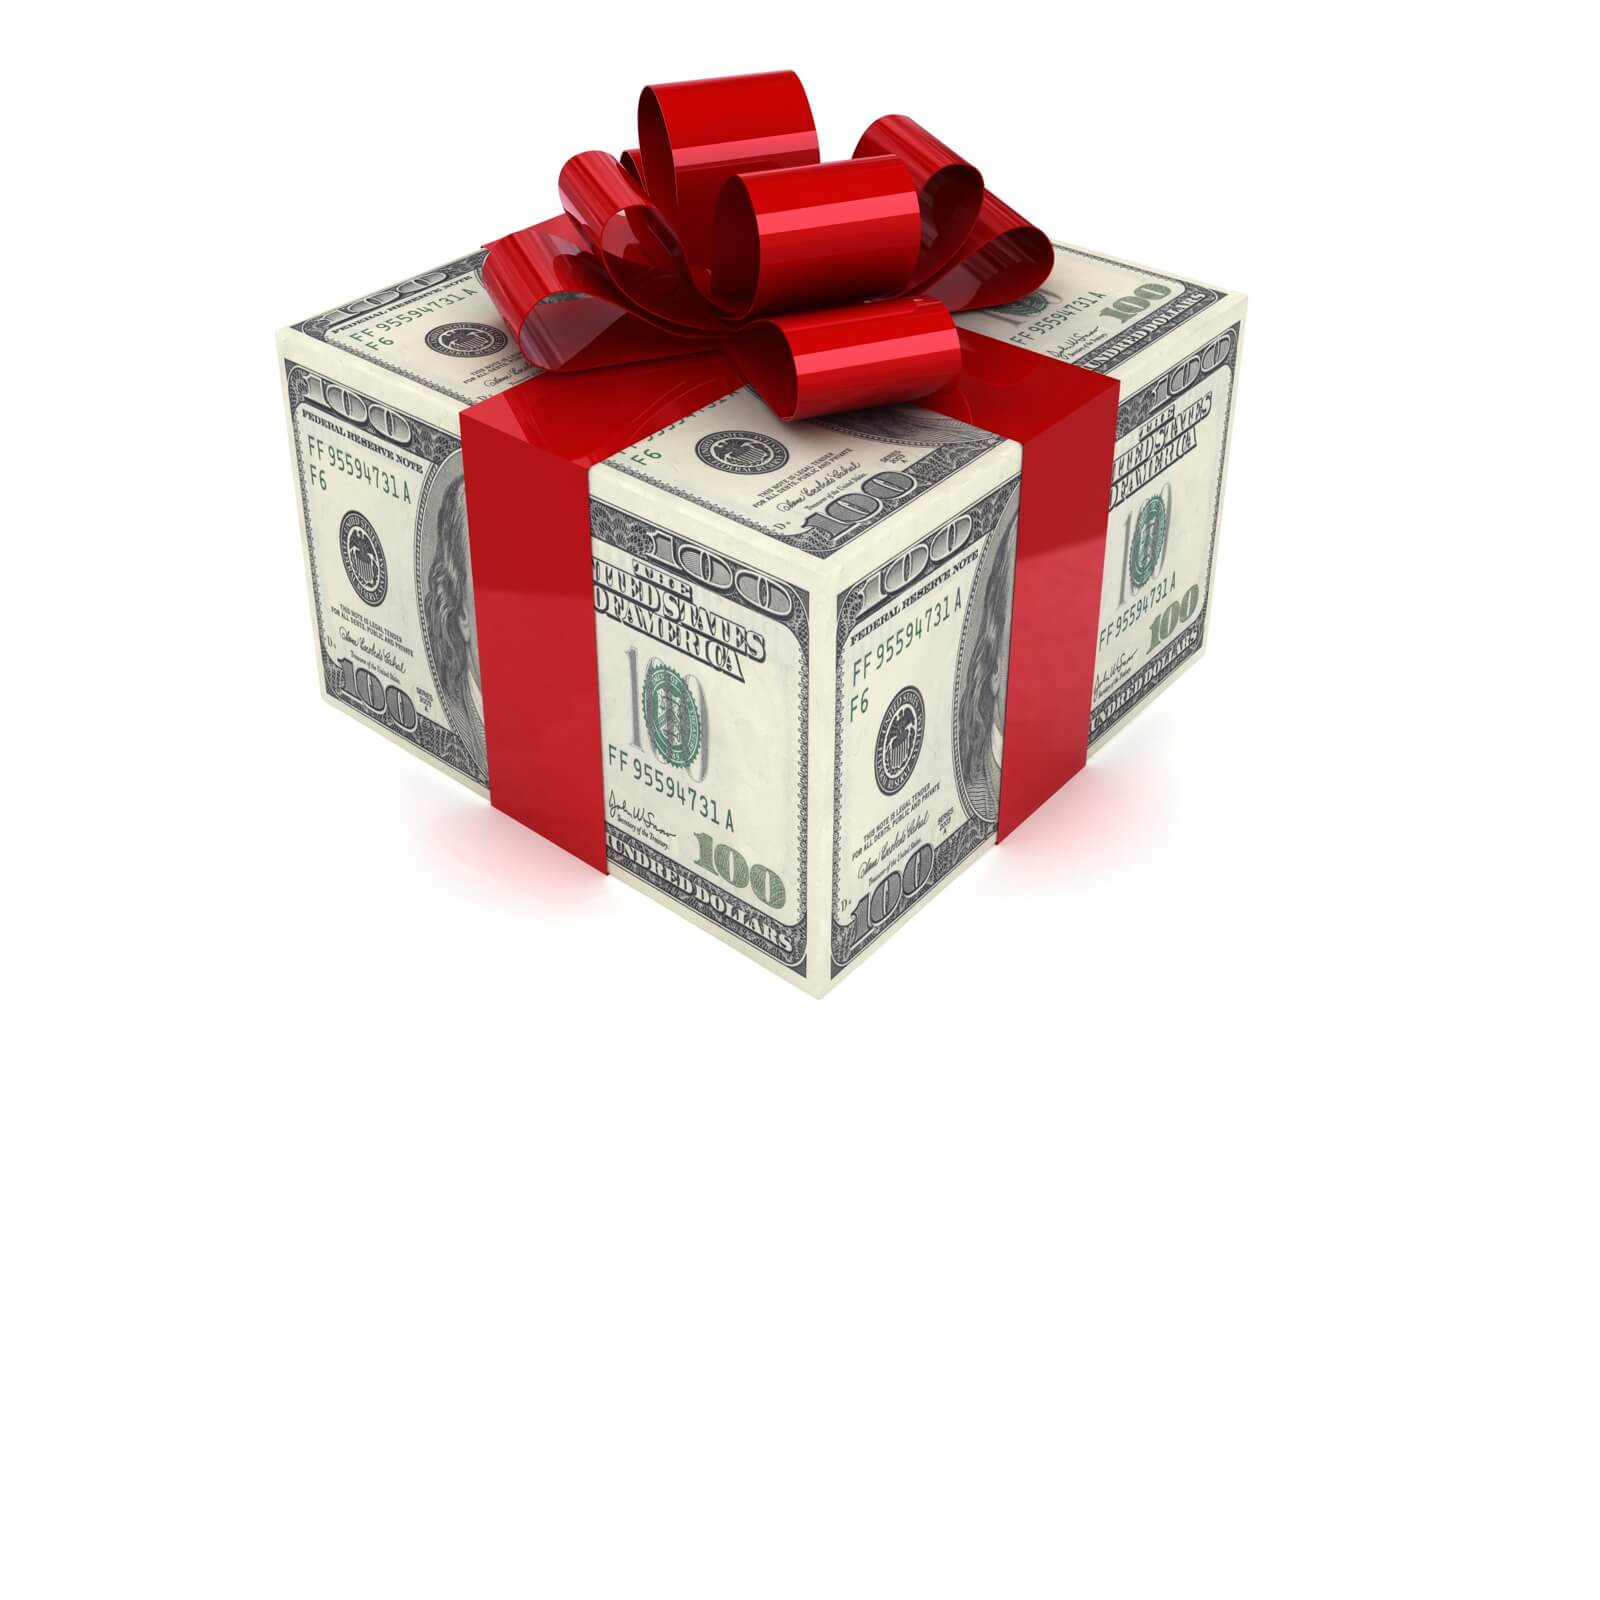 When is a Cash Gift Tax Charged & Who Pays?